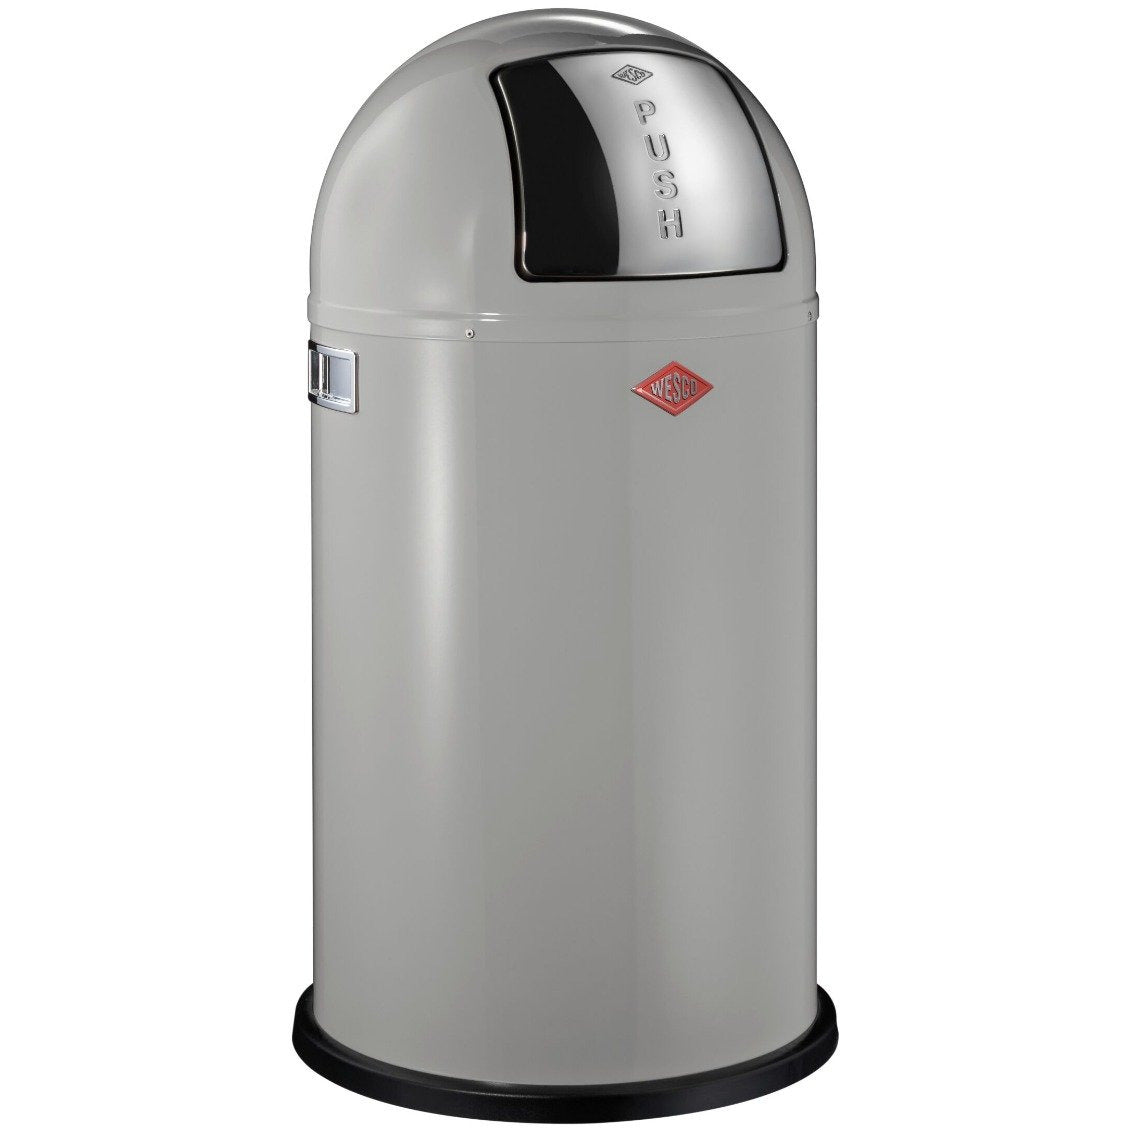 Wesco Pushboy Single Compartment 50 Litre Kitchen Bin in Cool Grey: 175831-76